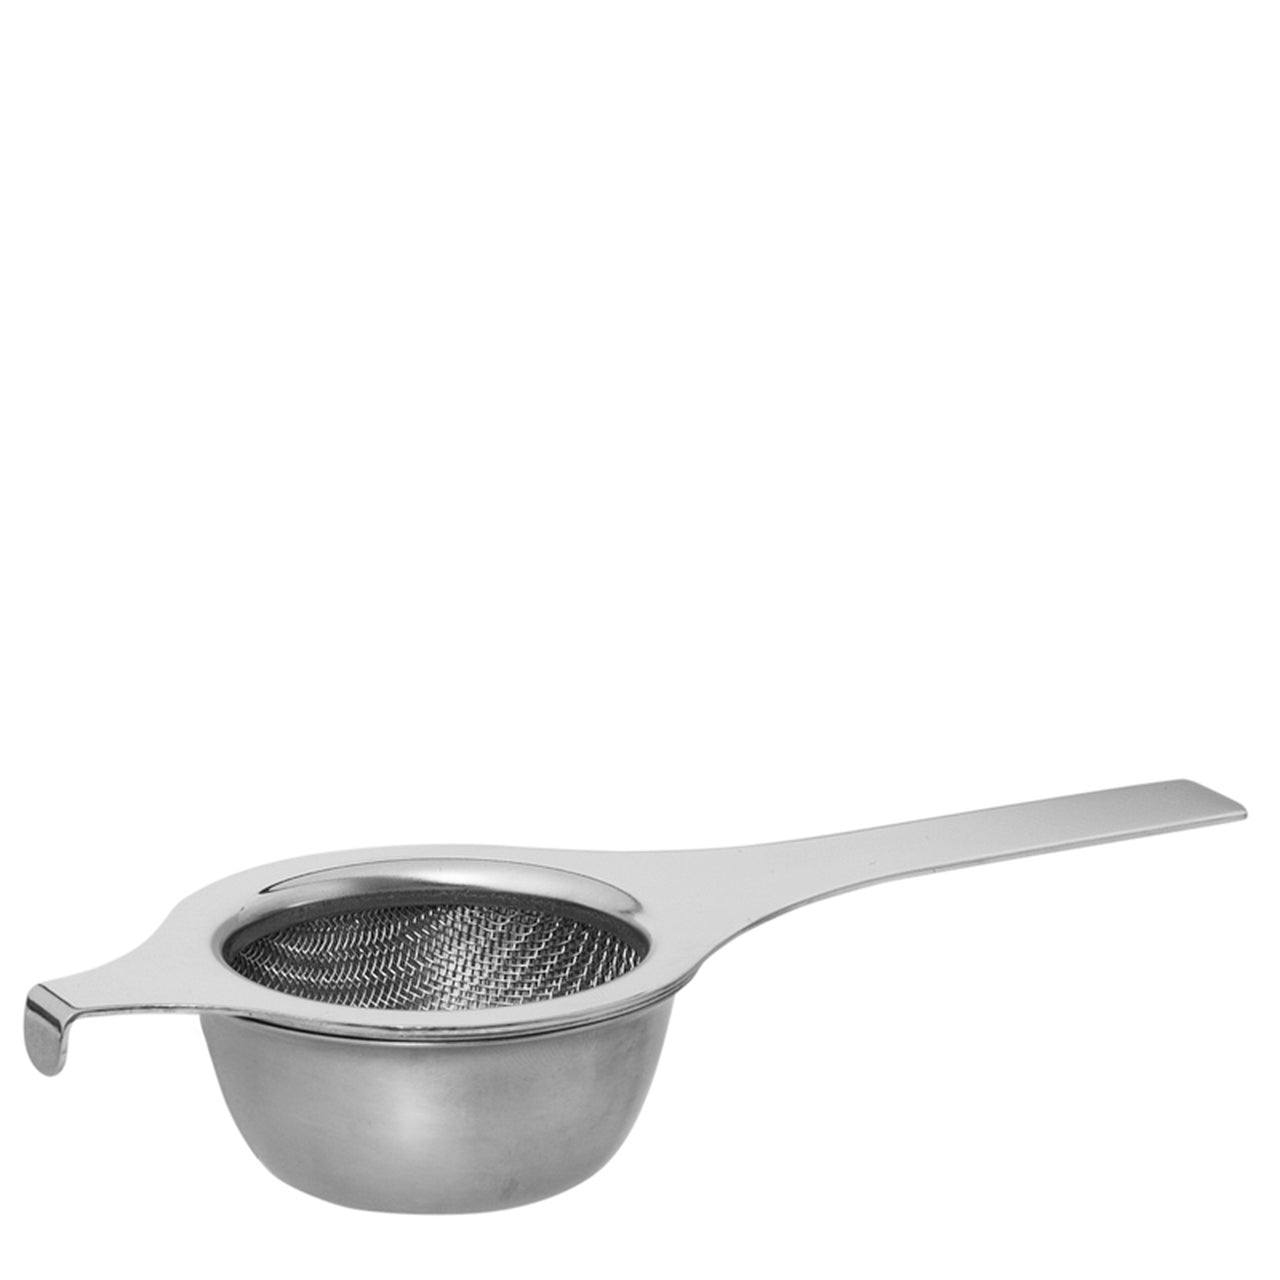 Mesh Tea Stainer W/Handle & Drip Bowl